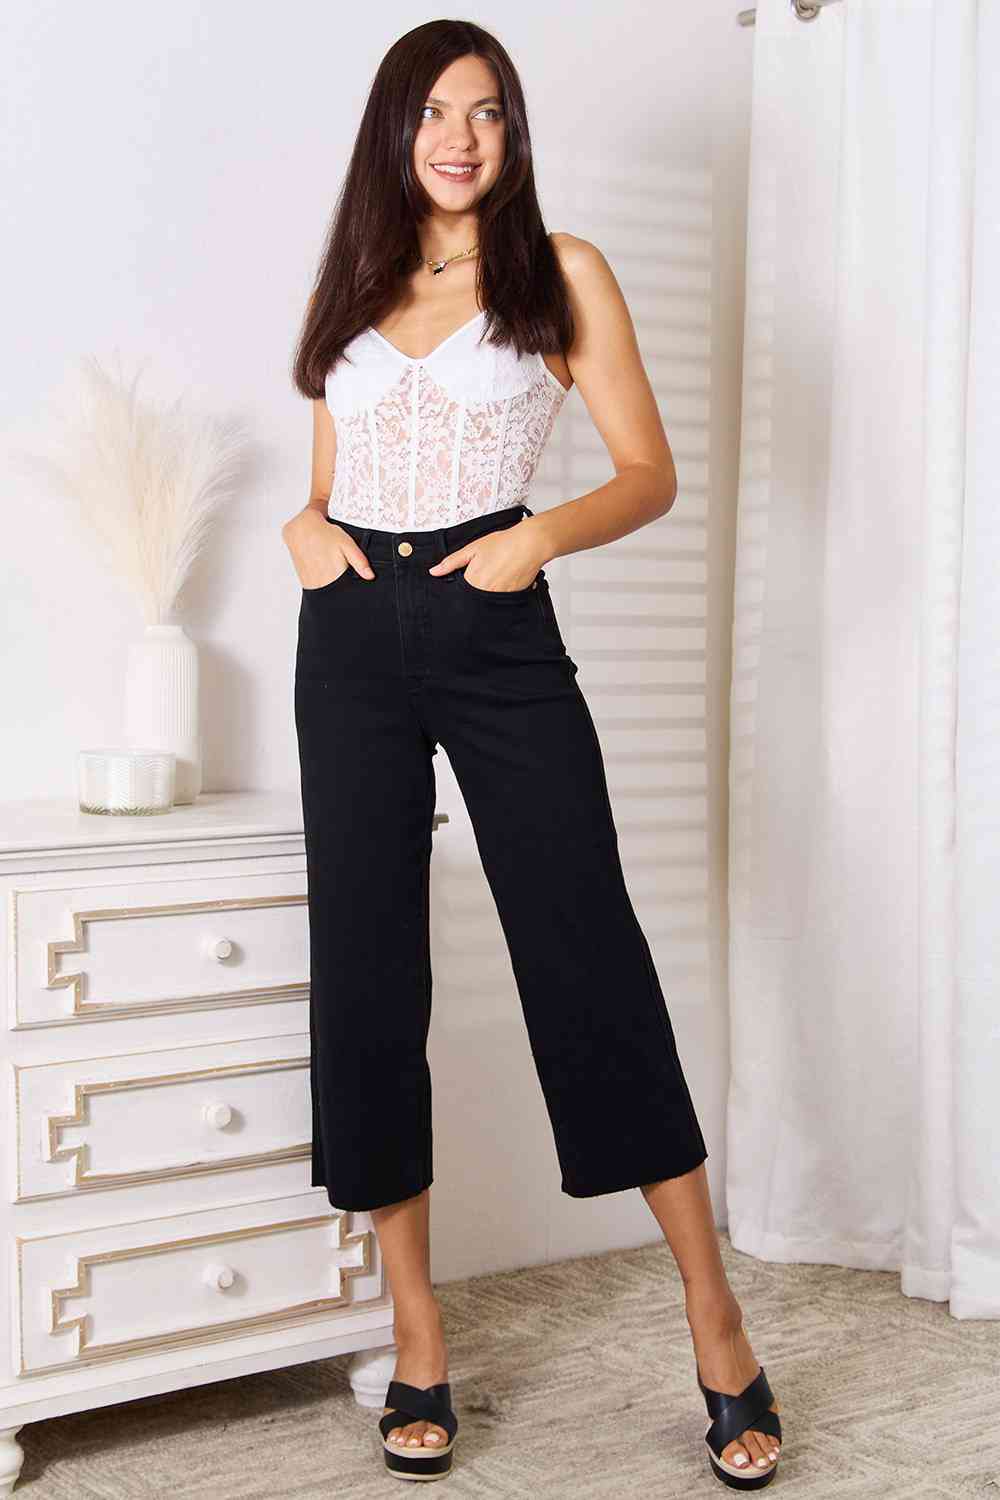 Judy Blue, High Waist Wide Leg Black Stretchy Cropped Jeans Style 88710